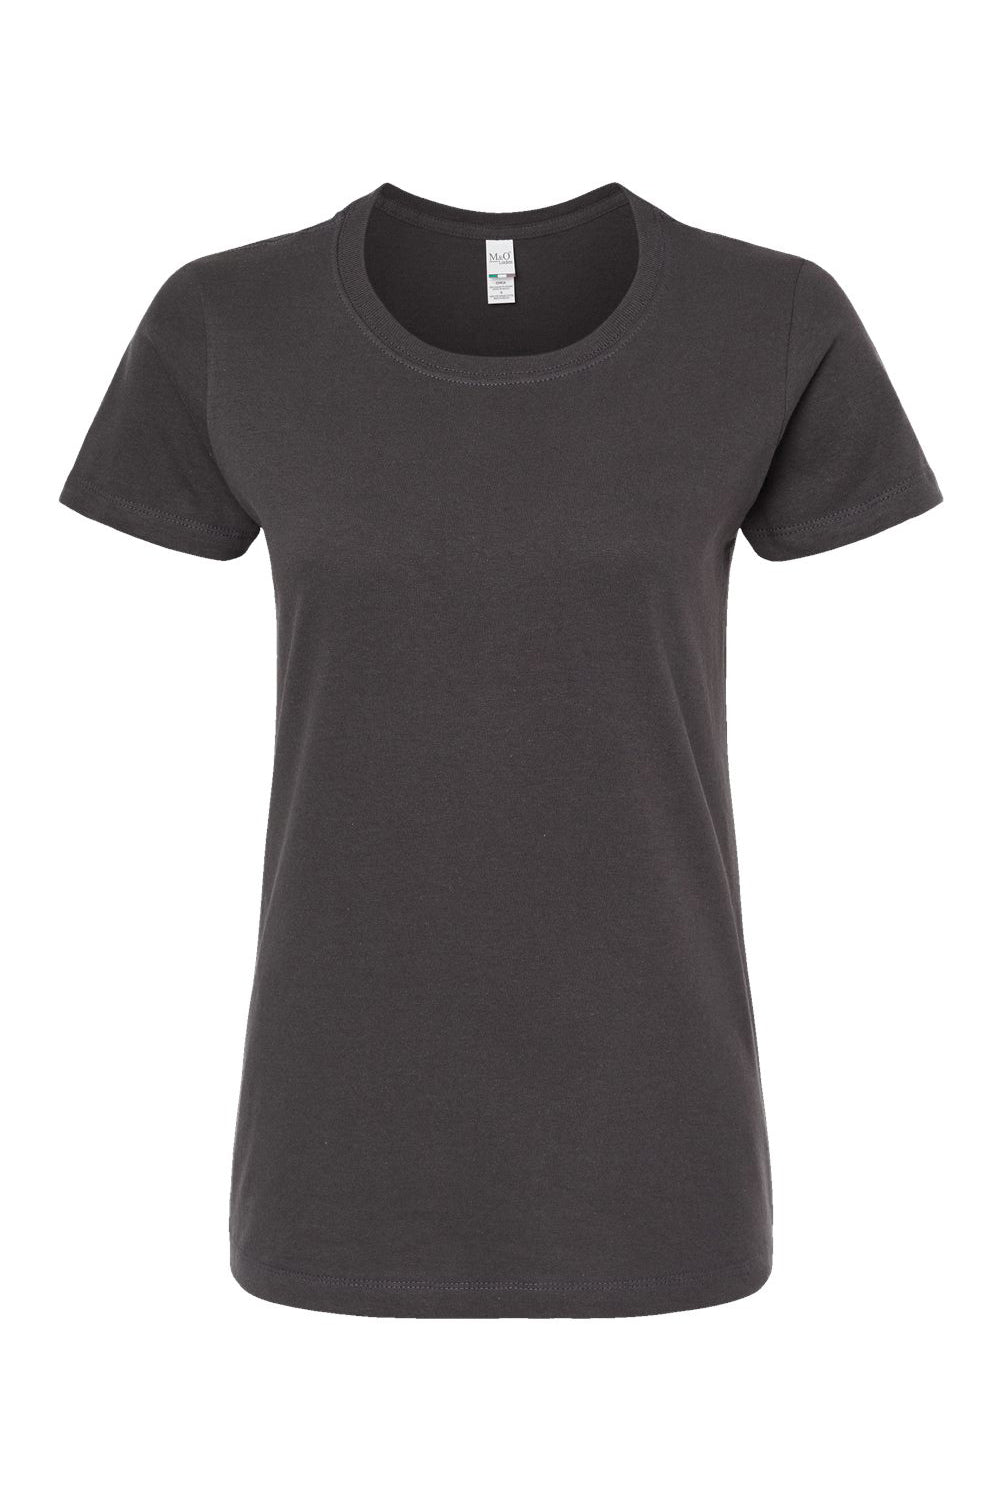 M&O 4810 Womens Gold Soft Touch Short Sleeve Crewneck T-Shirt Charcoal Grey Flat Front